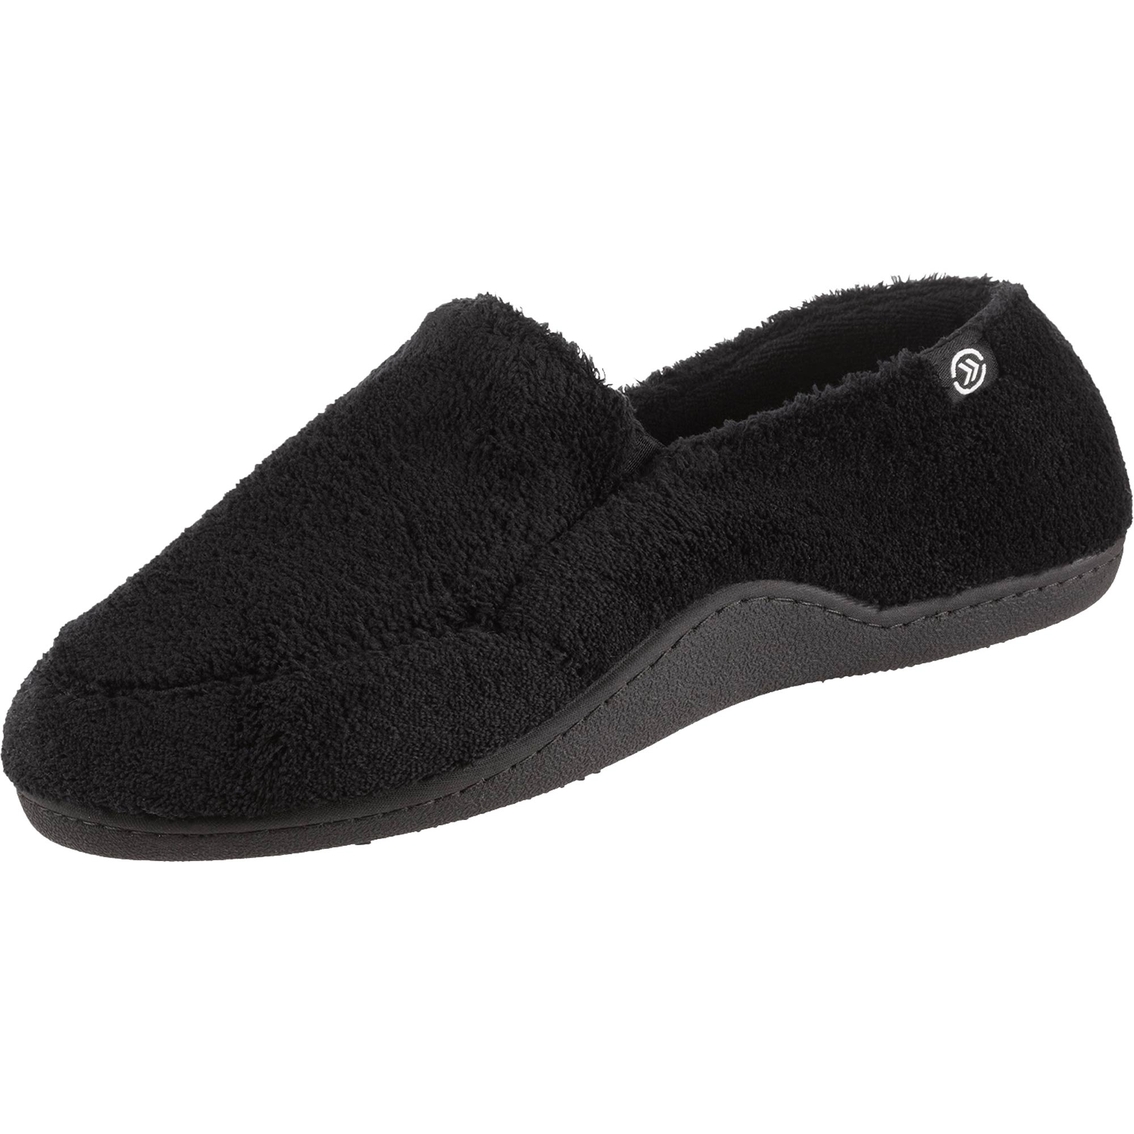 Isotoner Men's Microterry Slip On Slippers